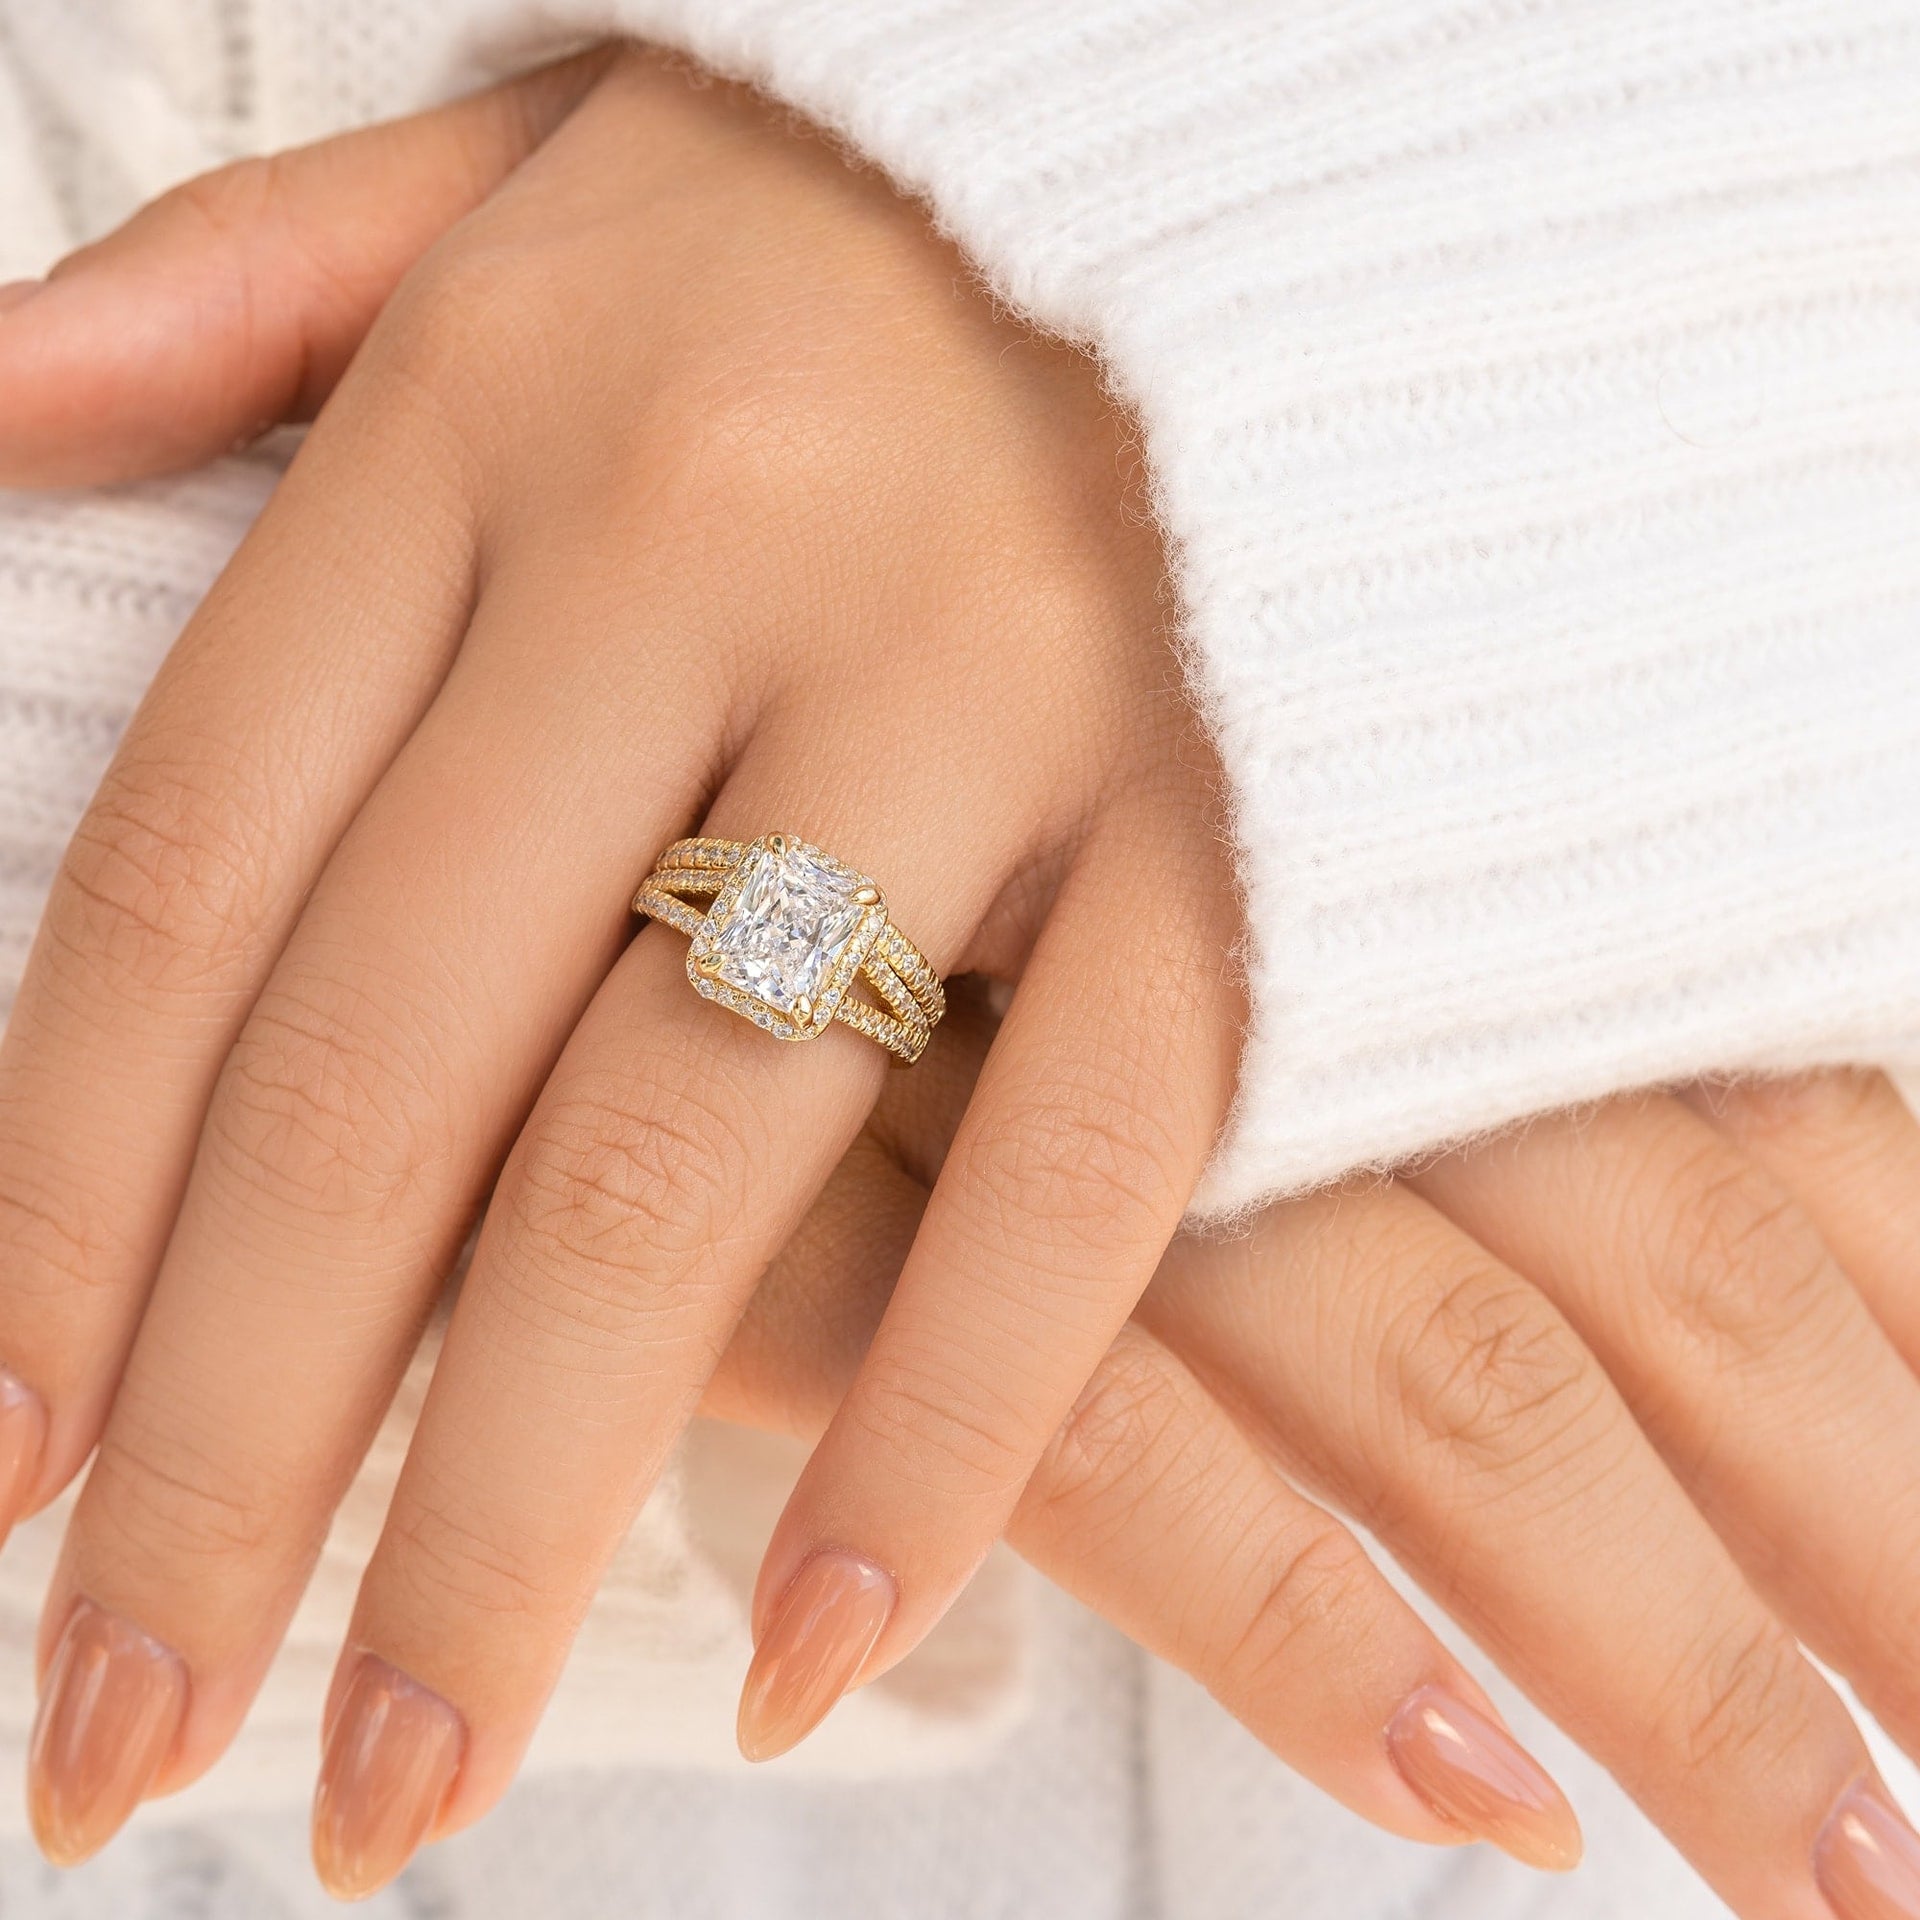 radiant gold split shank engagement ring with half eternity band modeled on female hand in white sweater